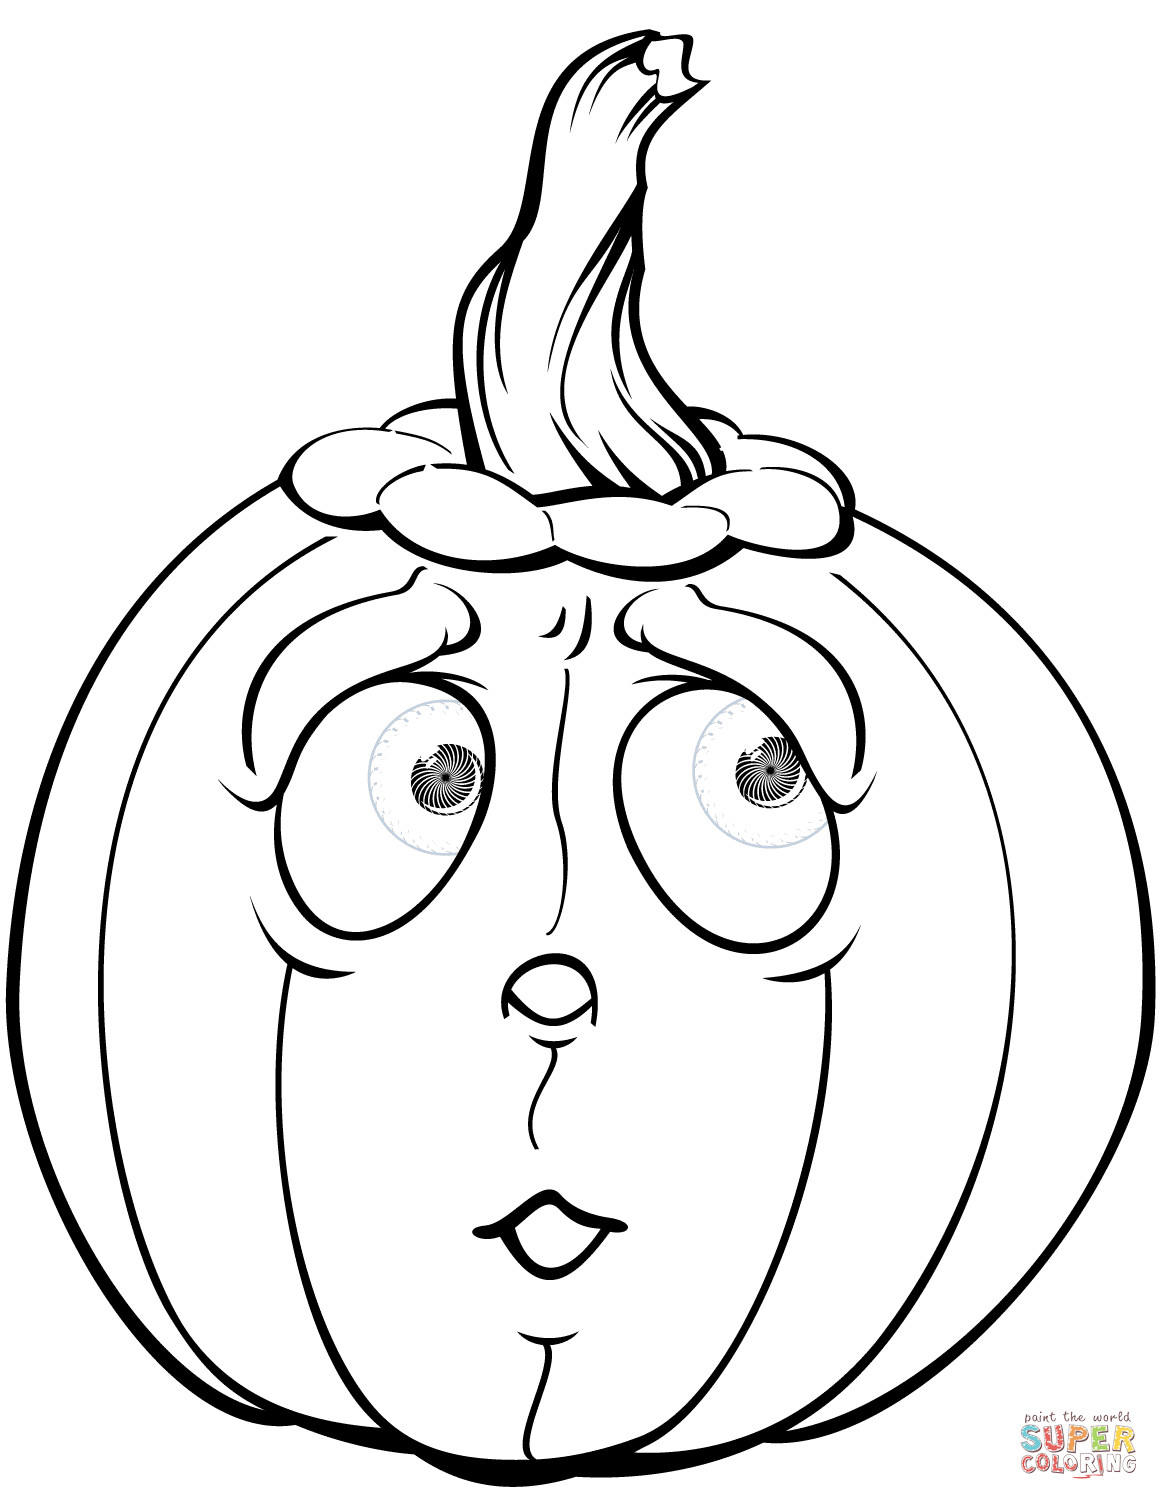 Printable Pumpkins Coloring Pages
 Scared Pumpkin coloring page